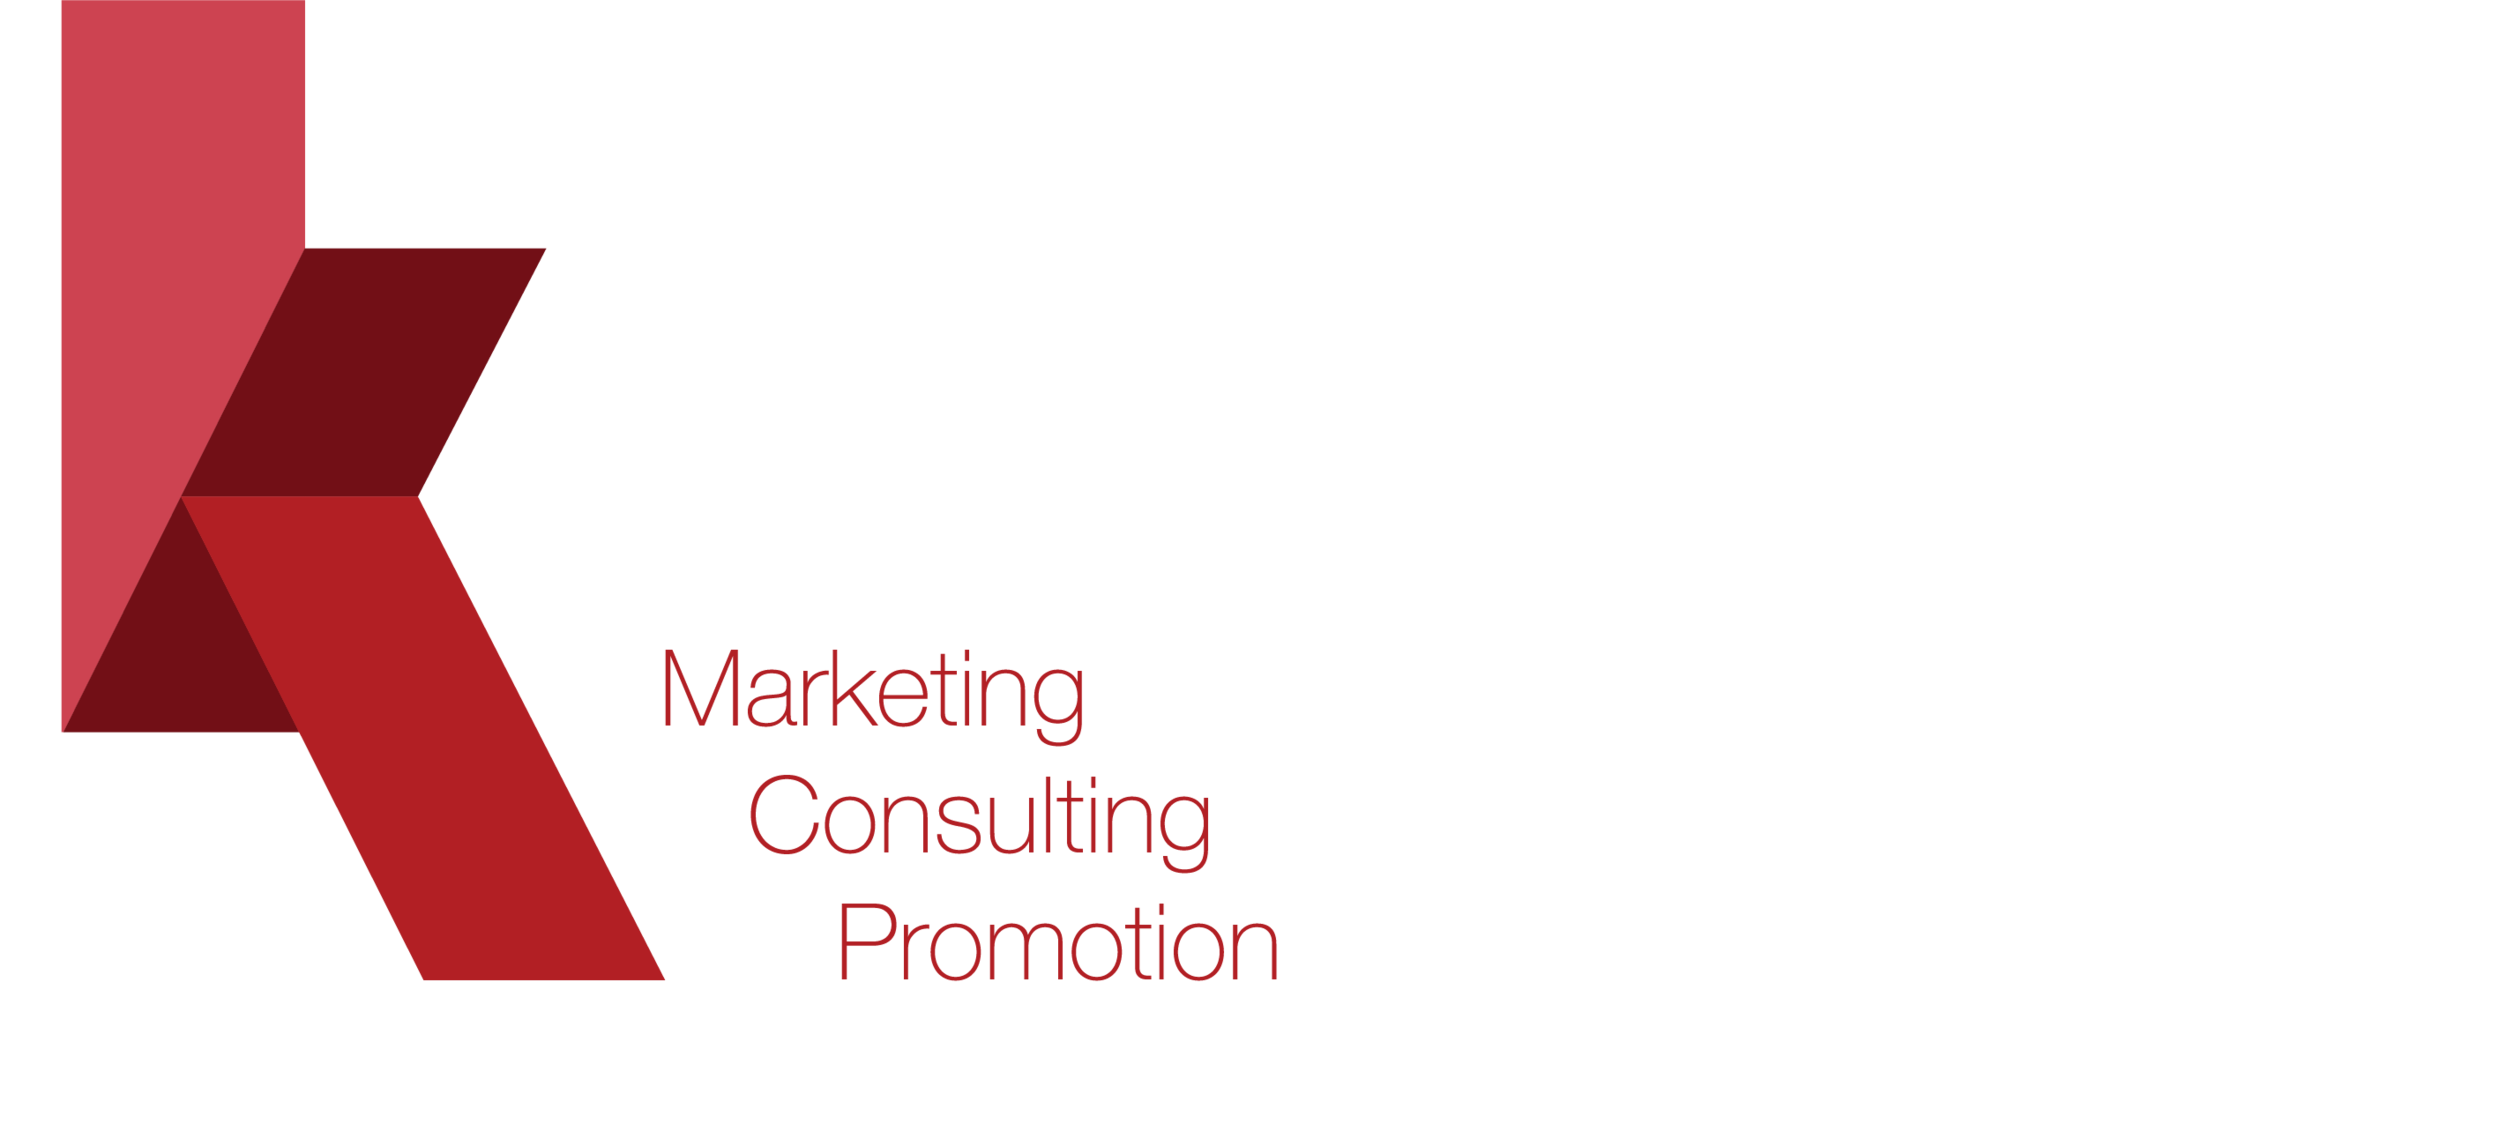 KIMCP - Marketing, Consulting and Promotion